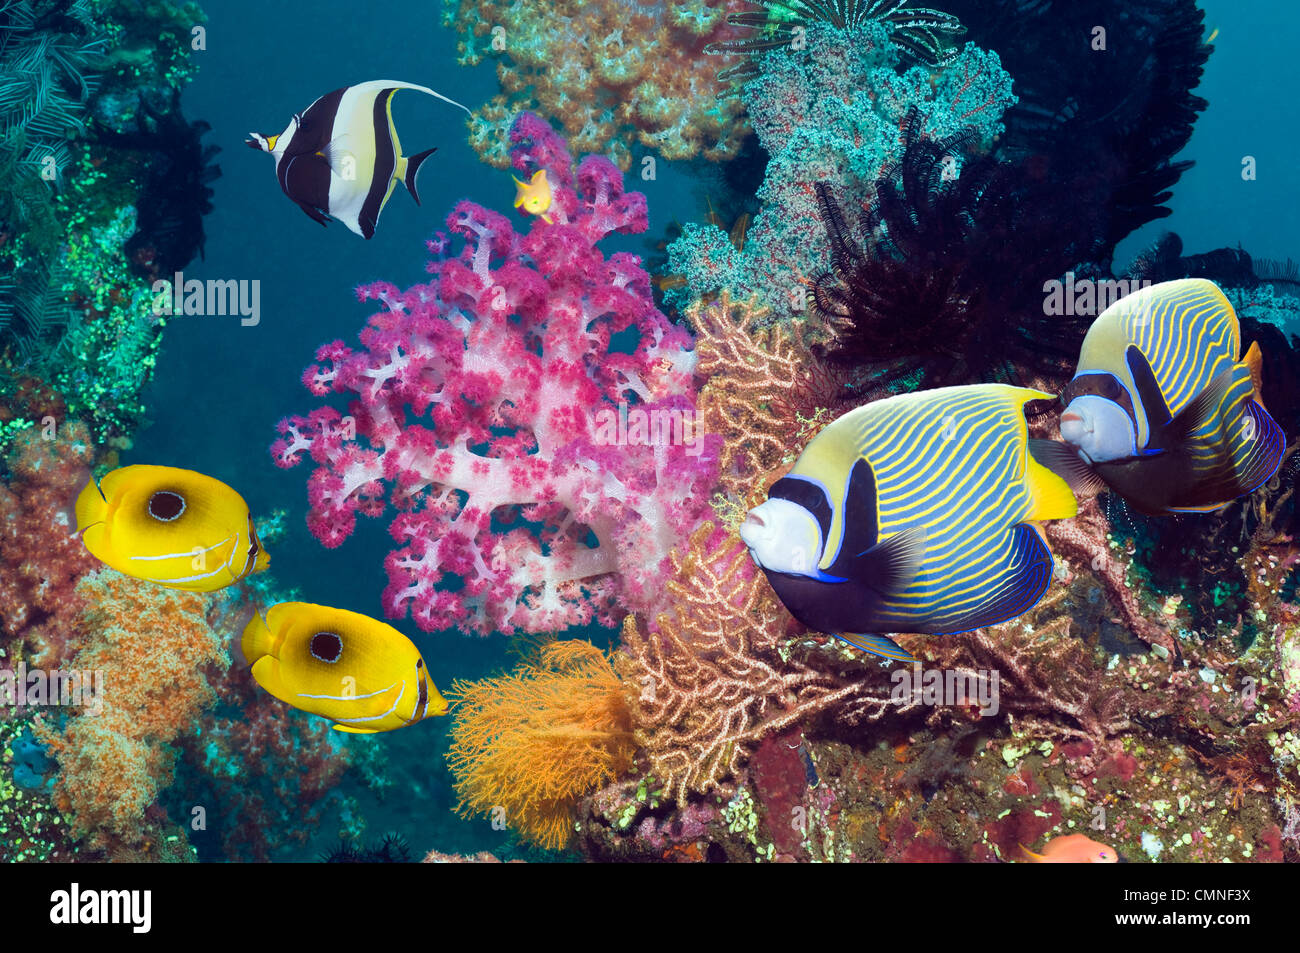 Emperor angelfish, Ovalspot butterflyfish and a Moorish idol swimming over coral reef with soft corals. Bali, Indonesia. Stock Photo